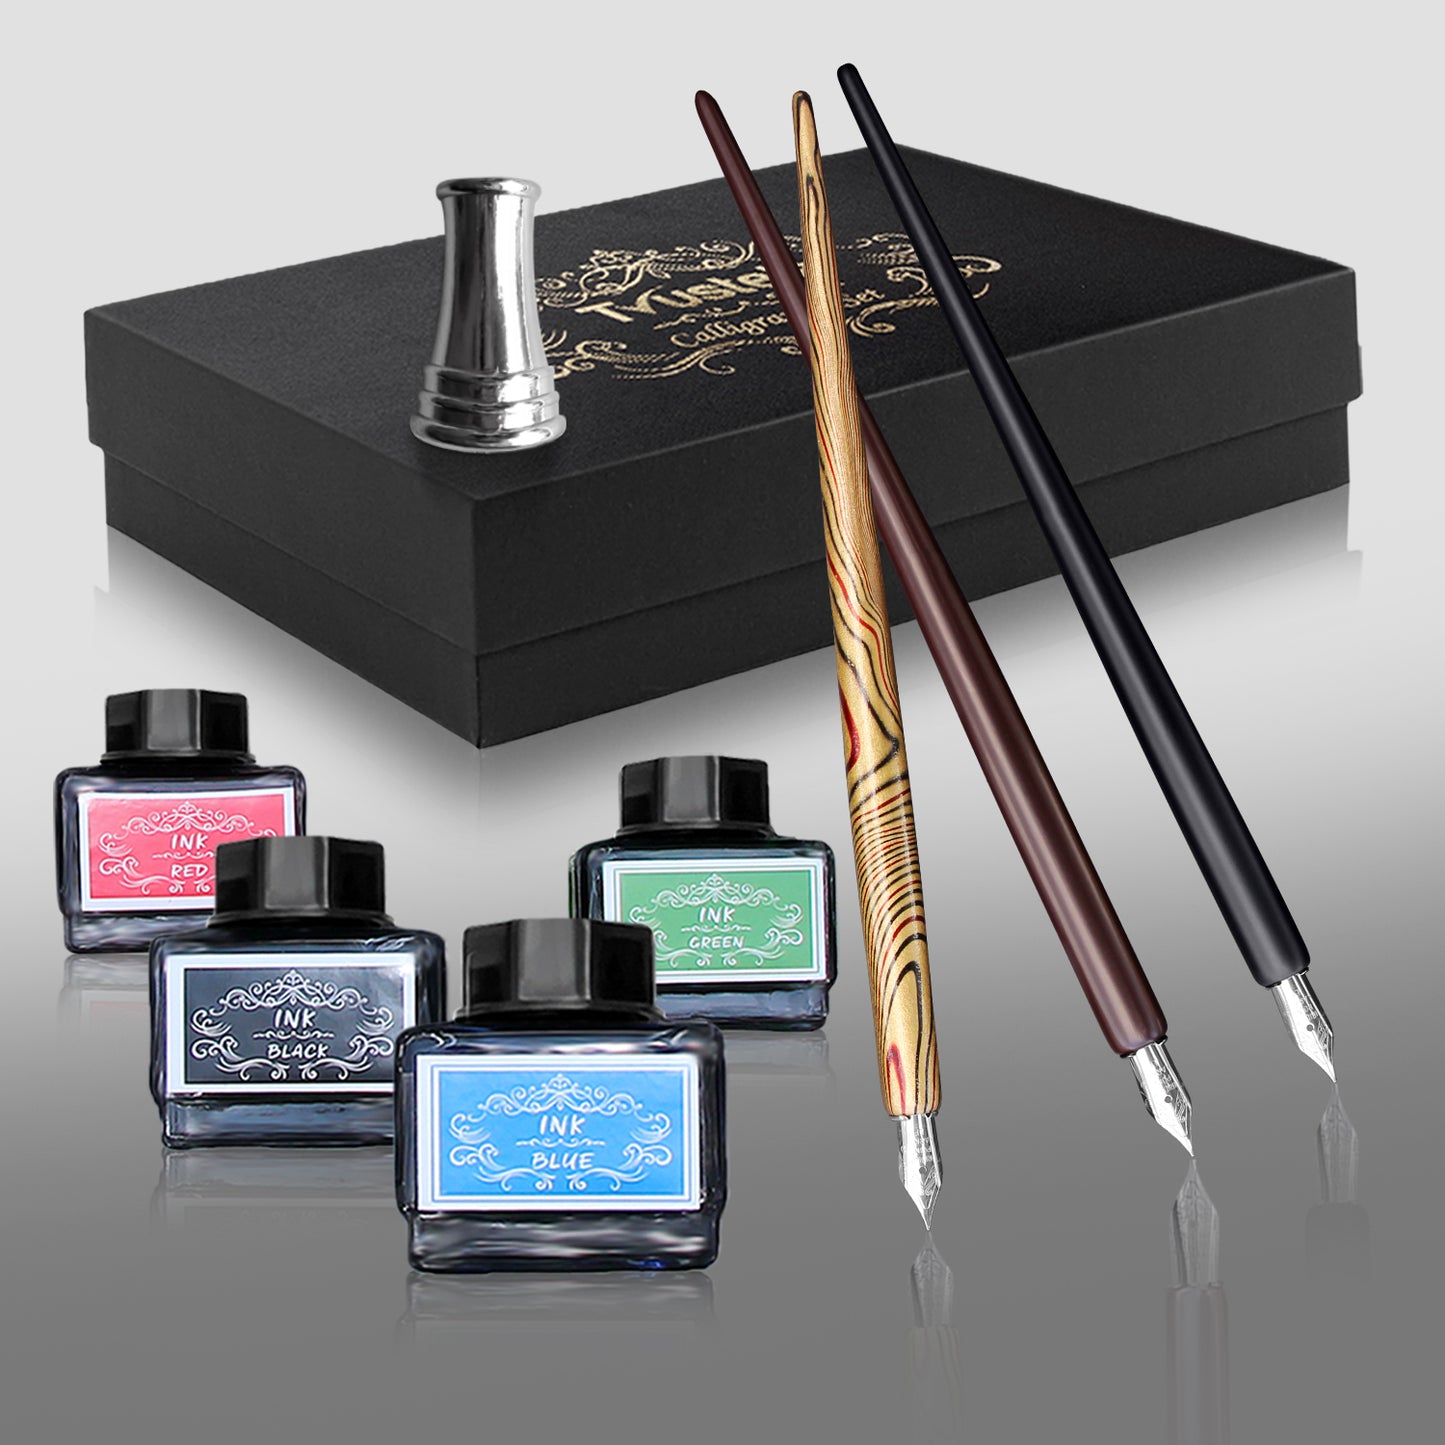 Calligraphy Set For Beginners Calligraphy Pens for beginners Calligraphy Pen